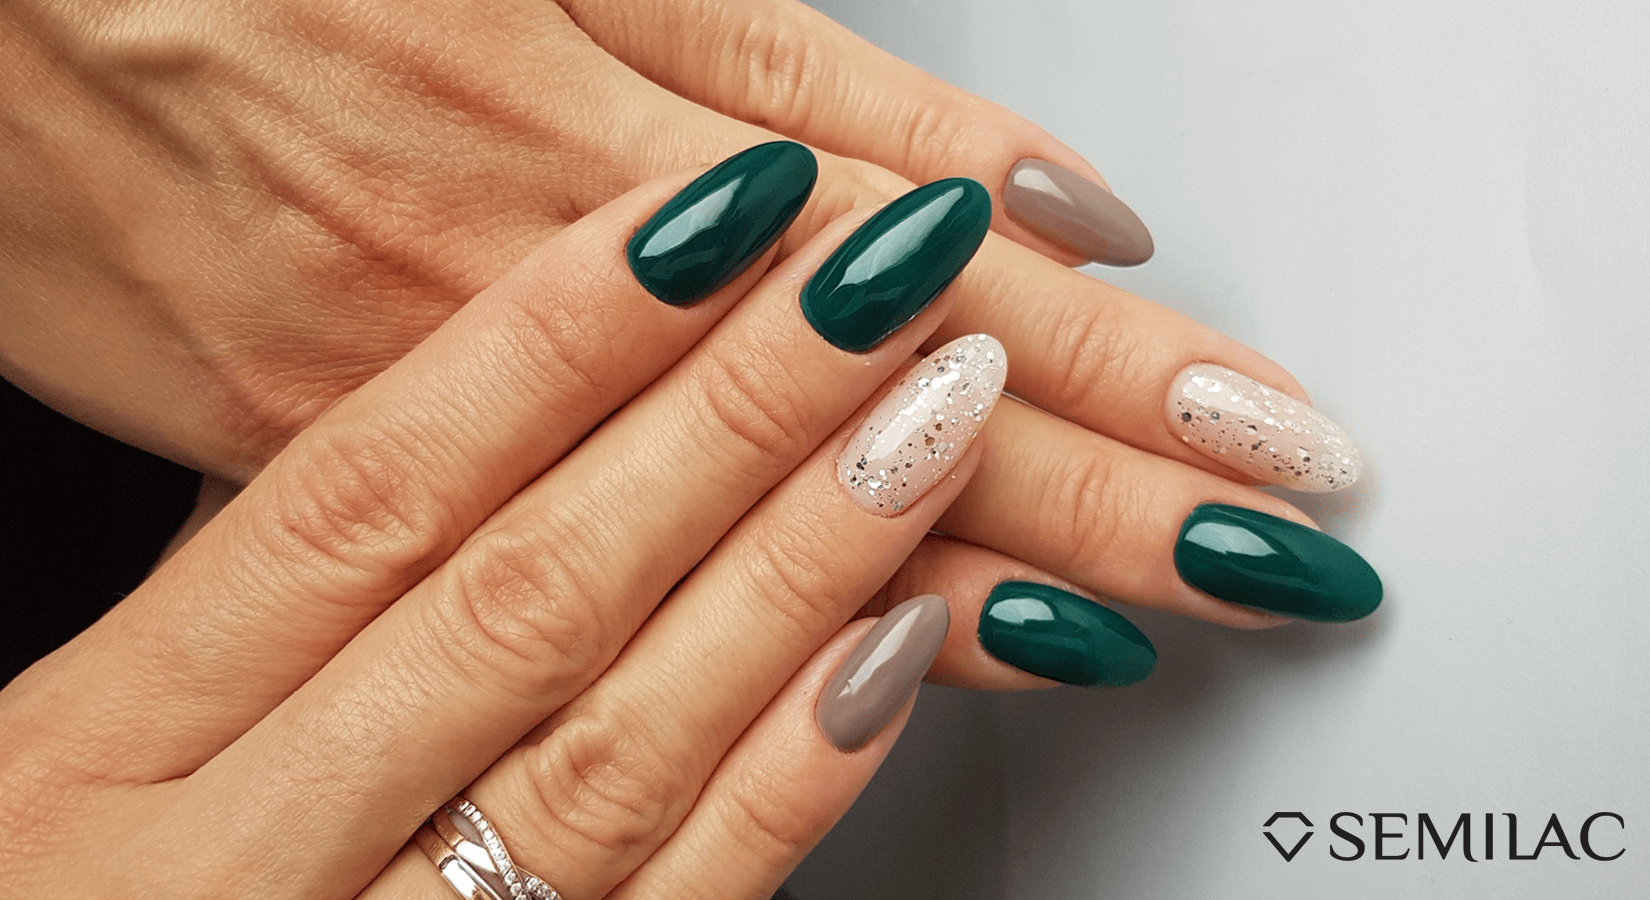 Get Lucky with These Stunning St. Patrick's Day Nail Ideas!